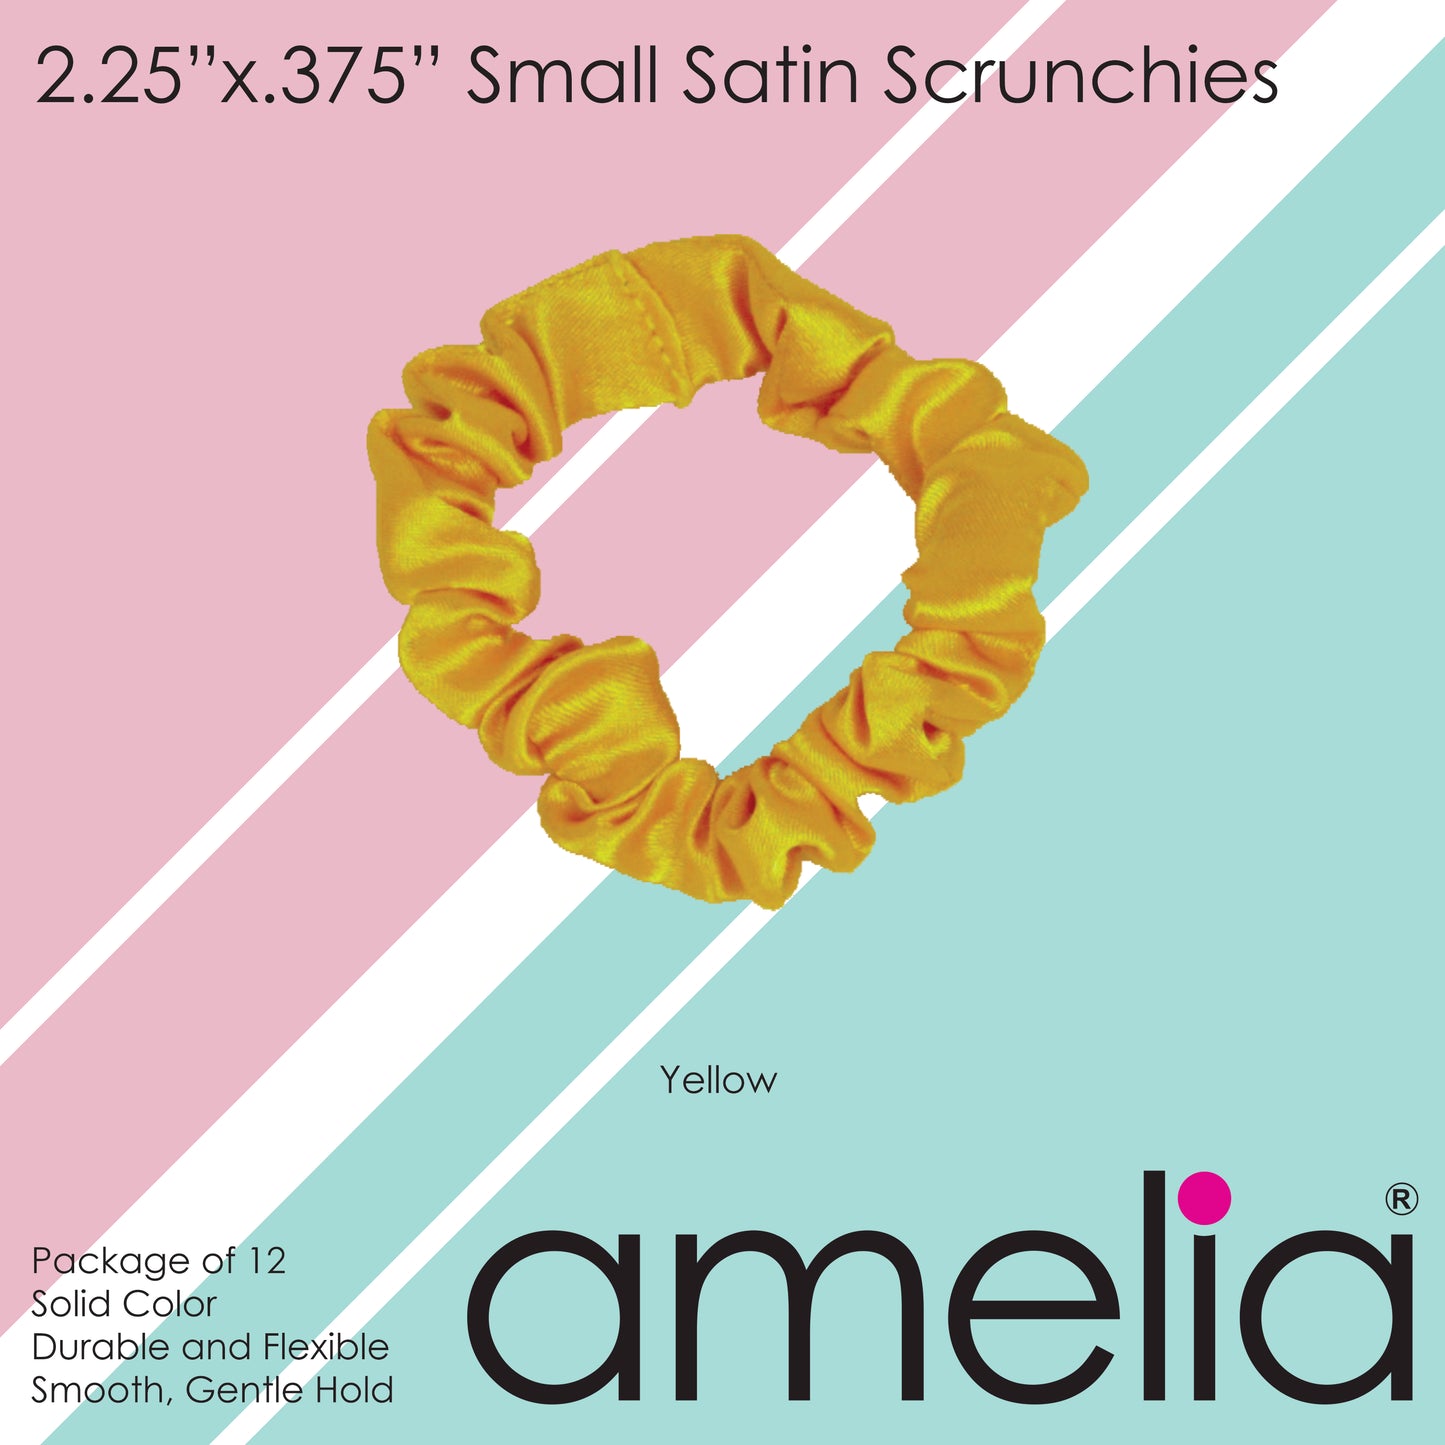 Amelia Beauty, Yellow Satin Scrunchies, 2.25in Diameter, Gentle on Hair, Strong Hold, No Snag, No Dents or Creases. 12 Pack